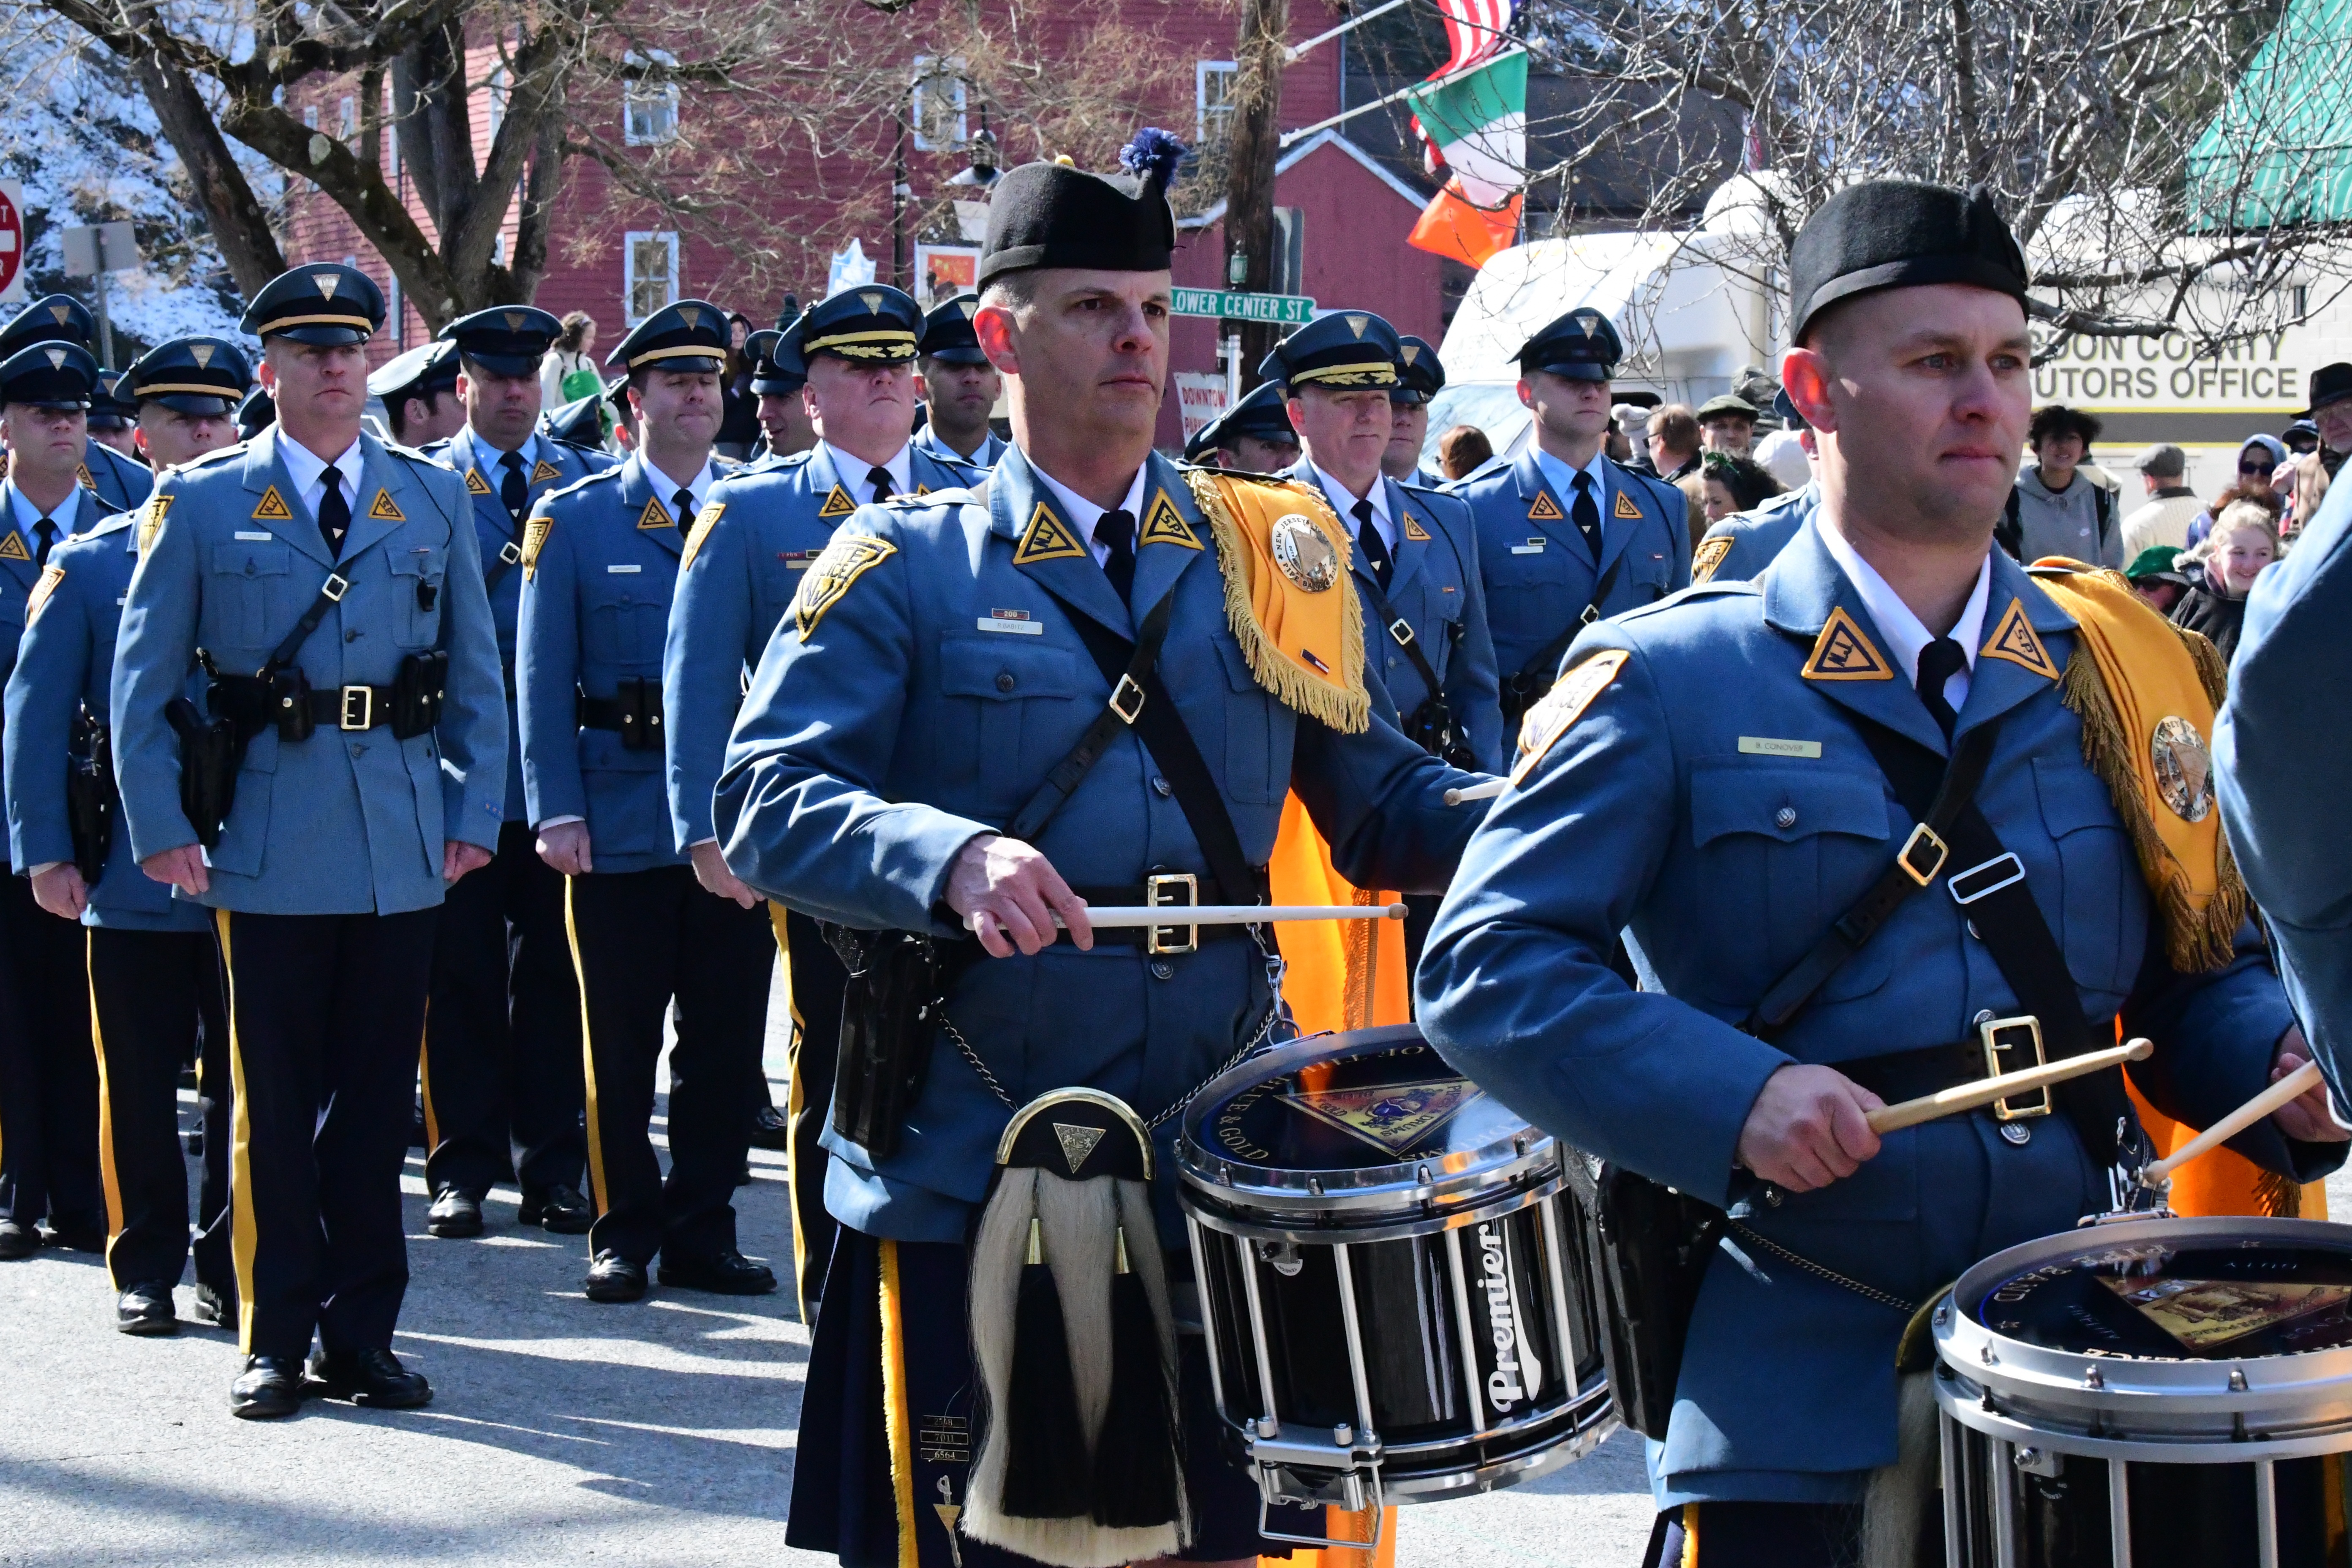 The 2022 St Patrick's Day Parade hosted by the Friendly Sons of St Patrick Hunterdon County took place in Clinton on March 13. Here, New Jersey State Police Pipes and Drum Band.
